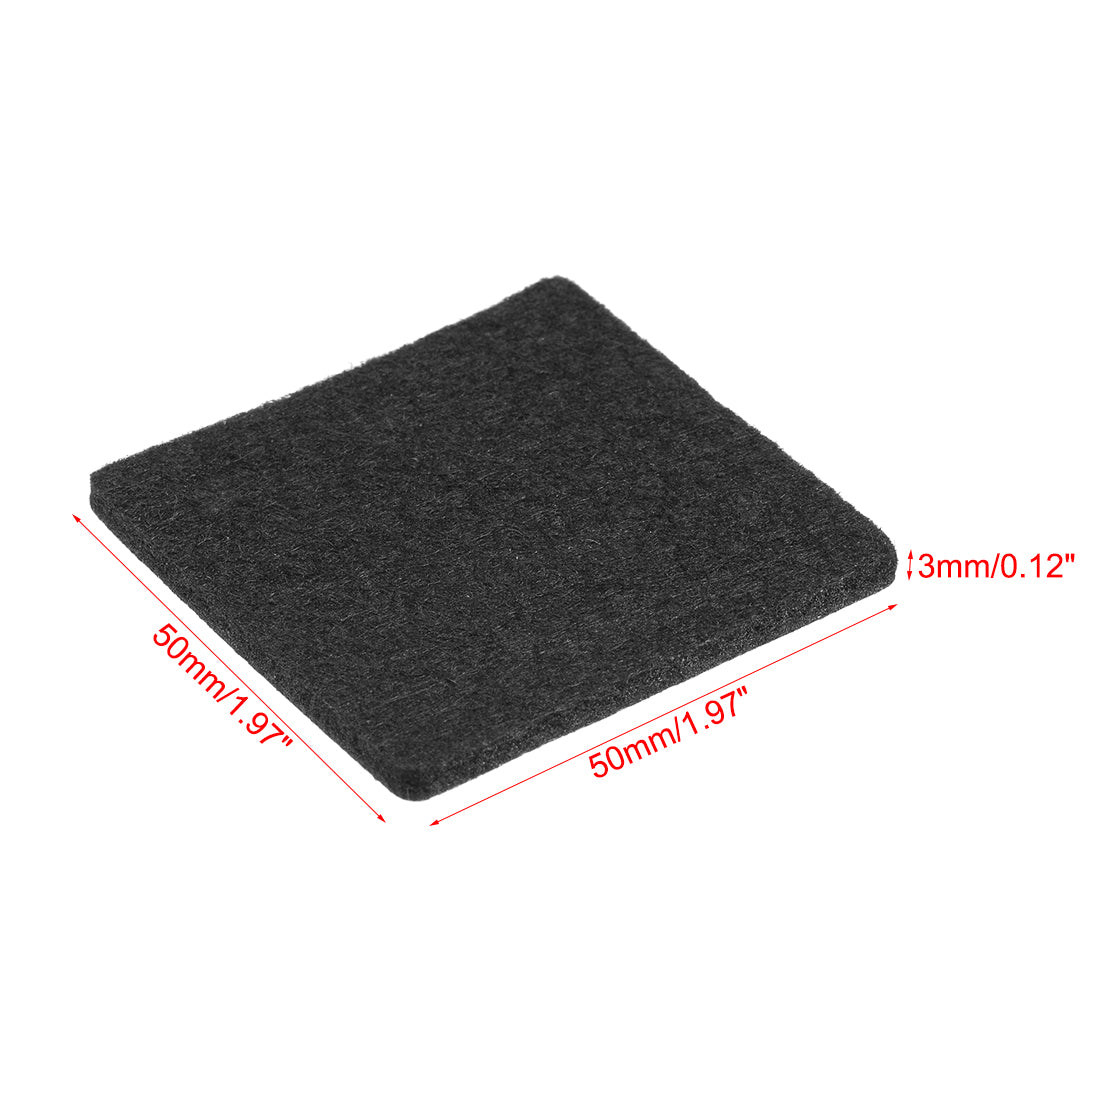 uxcell Uxcell Furniture Pads Adhesive Felt Pads 50mm x 50mm Square 3mm Thick Black 8Pcs